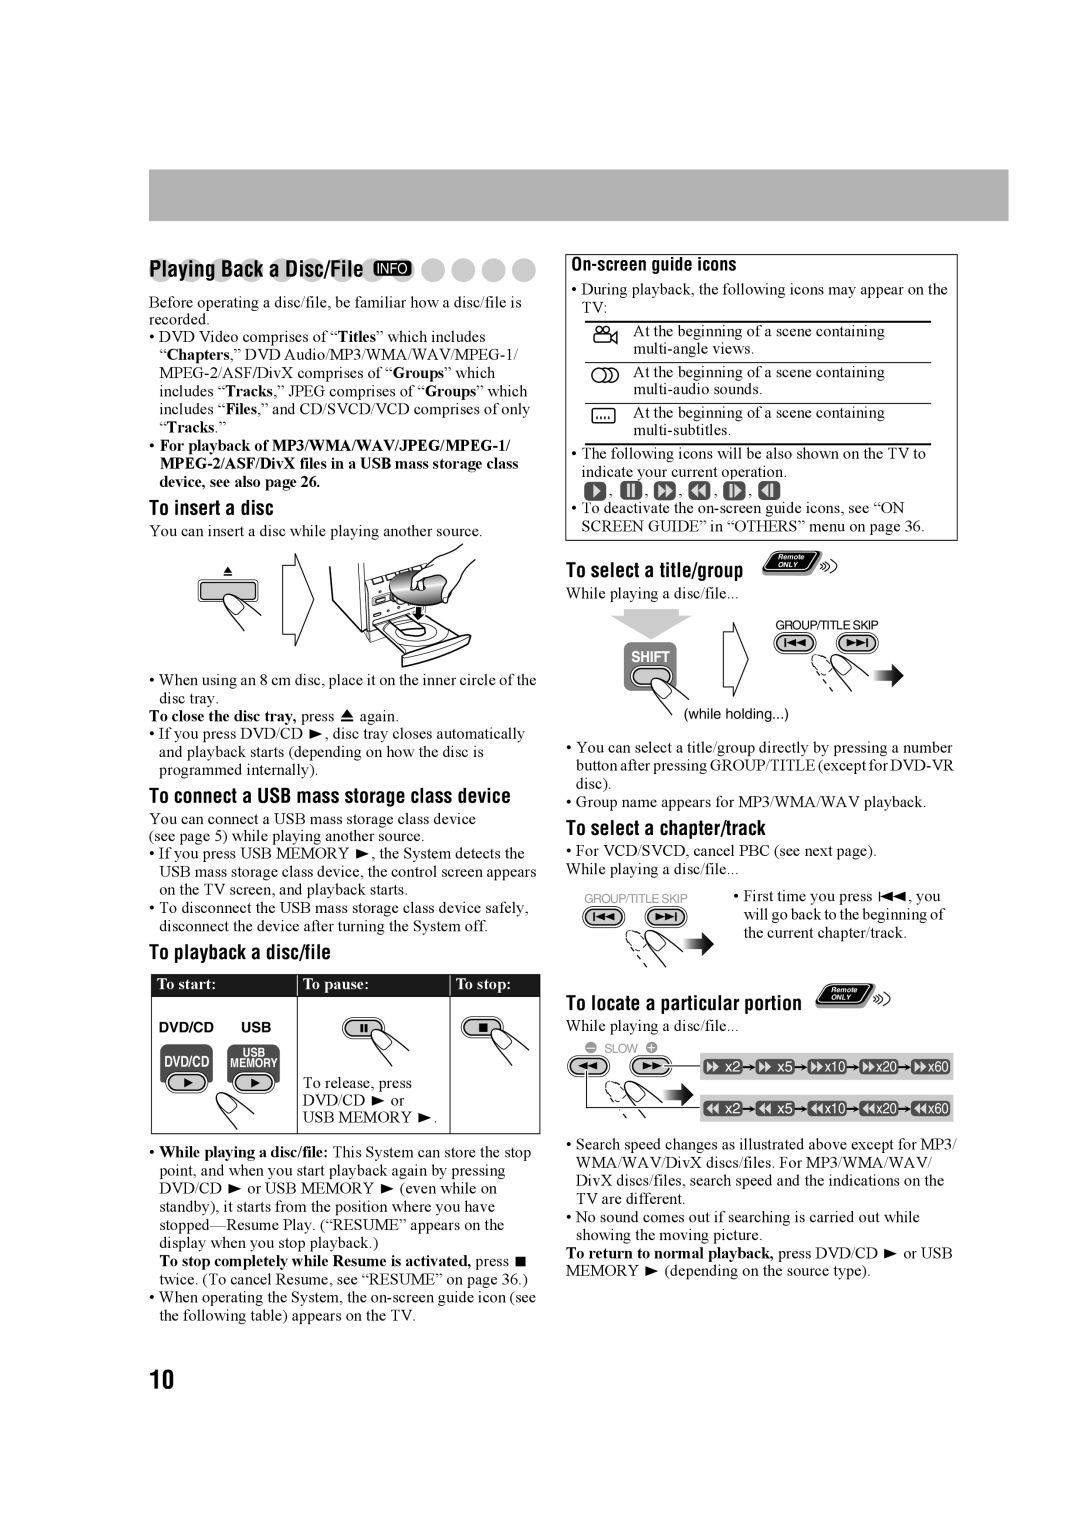 JVC GVT0203-006A manual Playing Back a Disc/File INFO, To insert a disc, To playback a disc/file, To select a title/group 